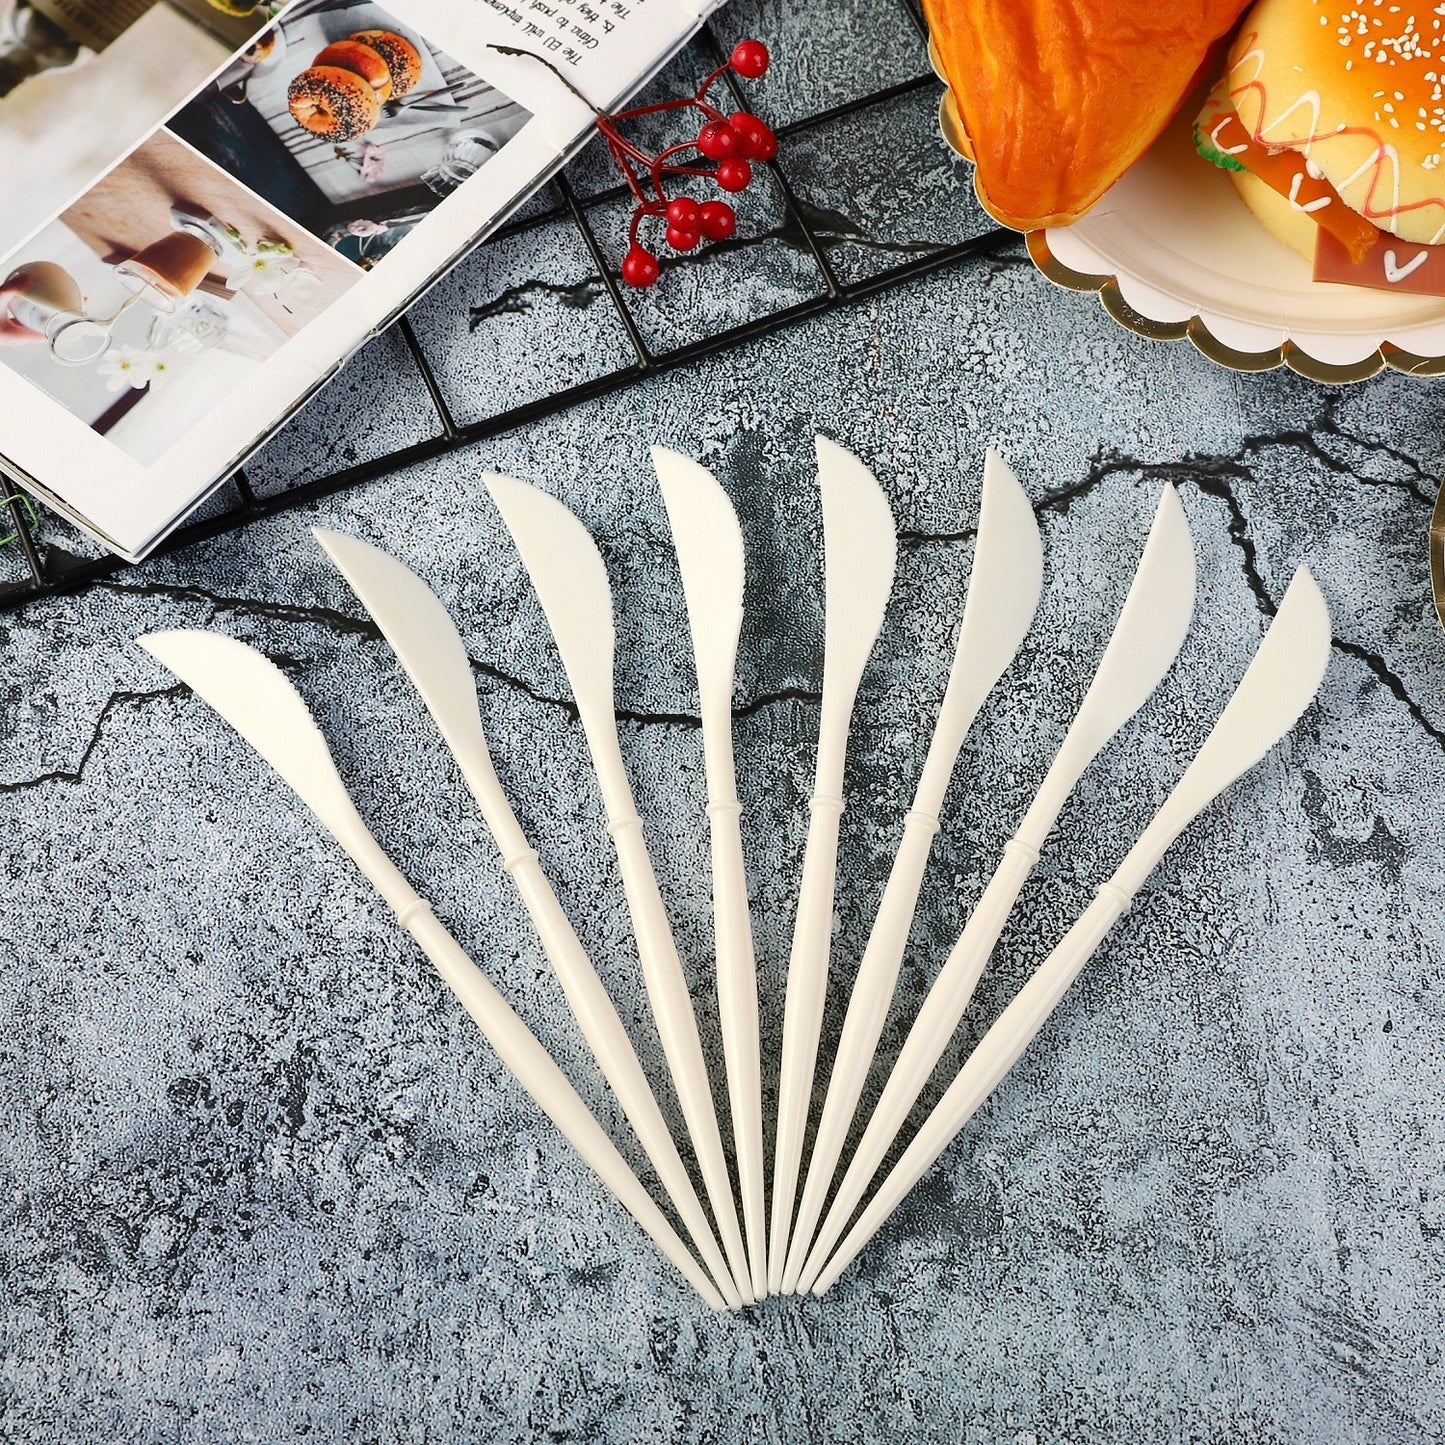 White Disposable Cutlery Plastic Knife Forks Spoons 20cm Tableware Set Summer Camping BBQ Wedding Outdoor Birthday Party Supplies